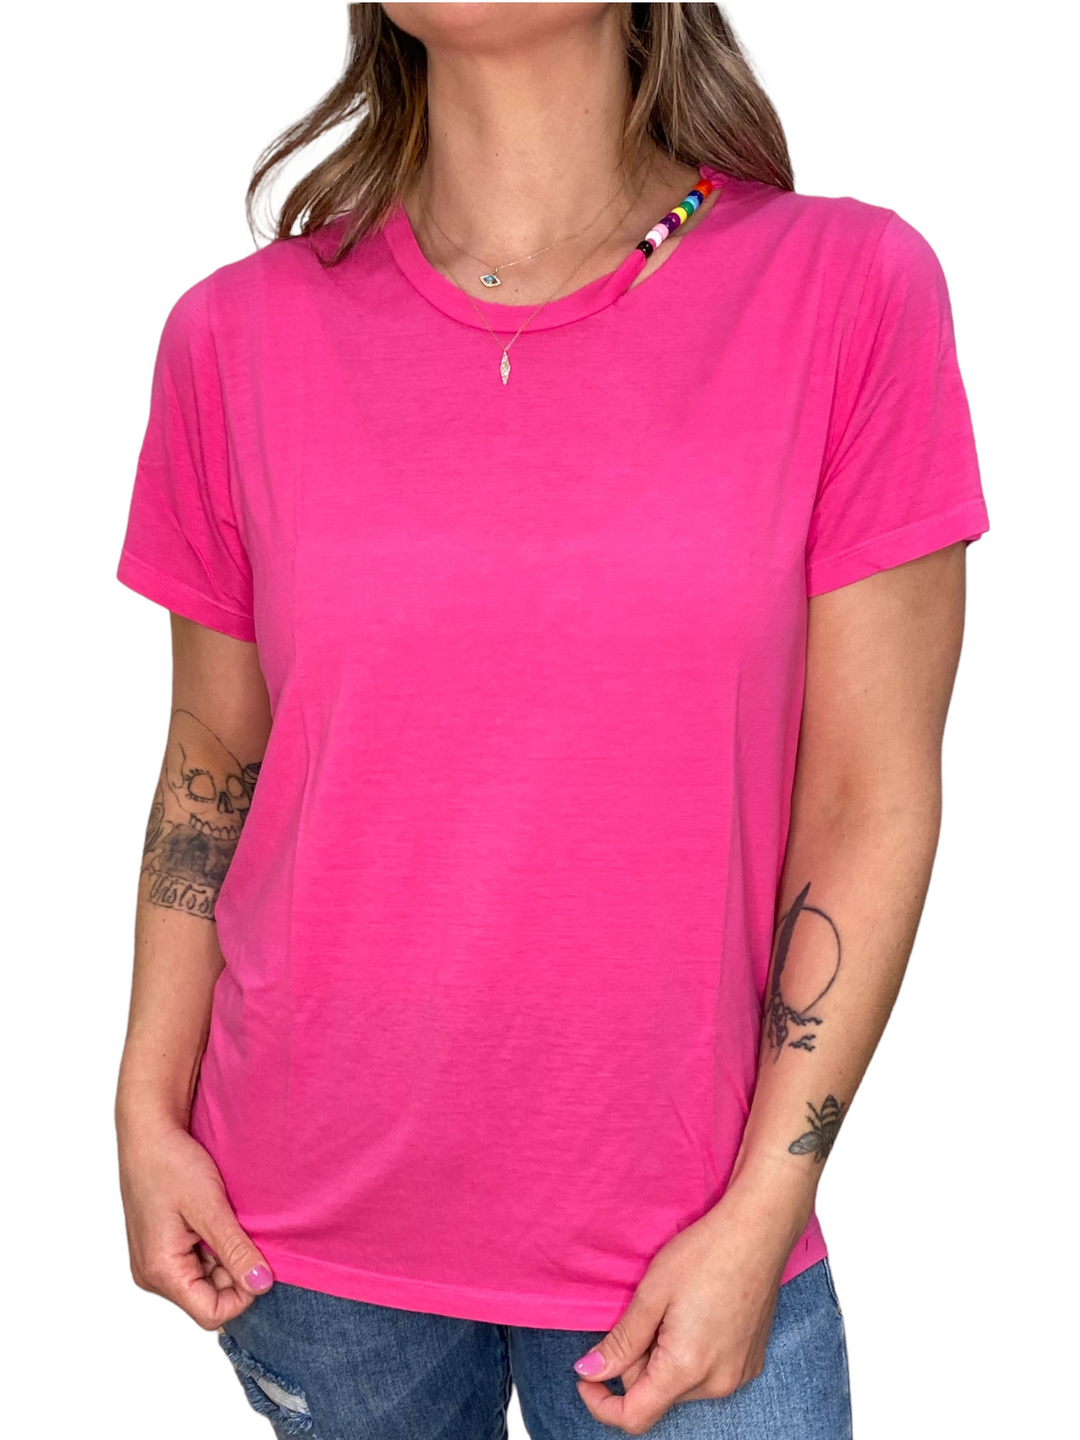 BRIGHT PINK THURSTON TEE W/BEADED NECK - Kingfisher Road - Online Boutique